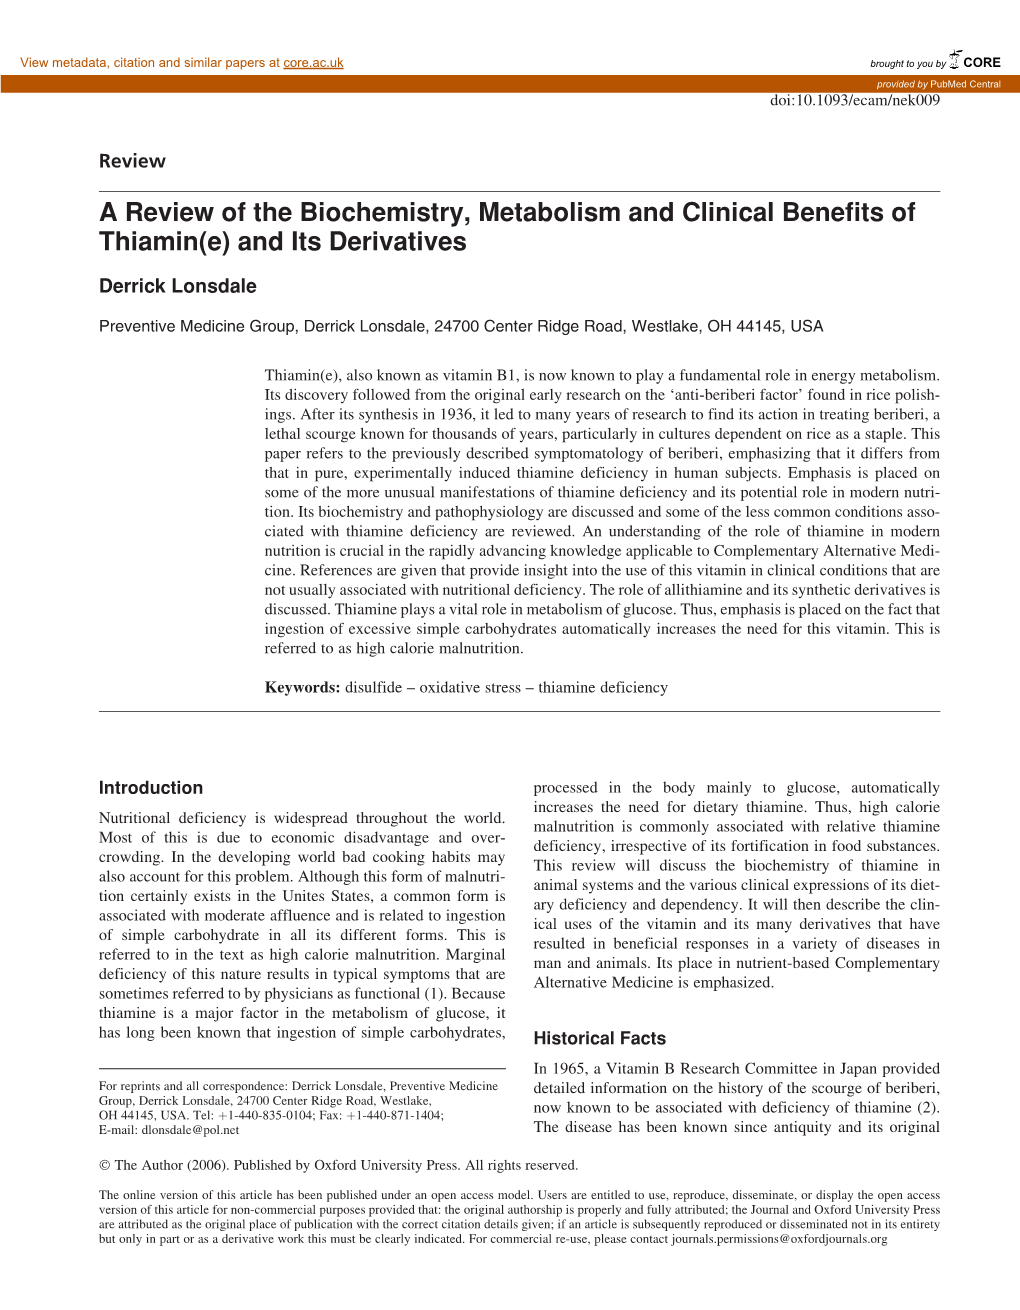 A Review of the Biochemistry, Metabolism and Clinical Benefits of Thiamin(E) and Its Derivatives